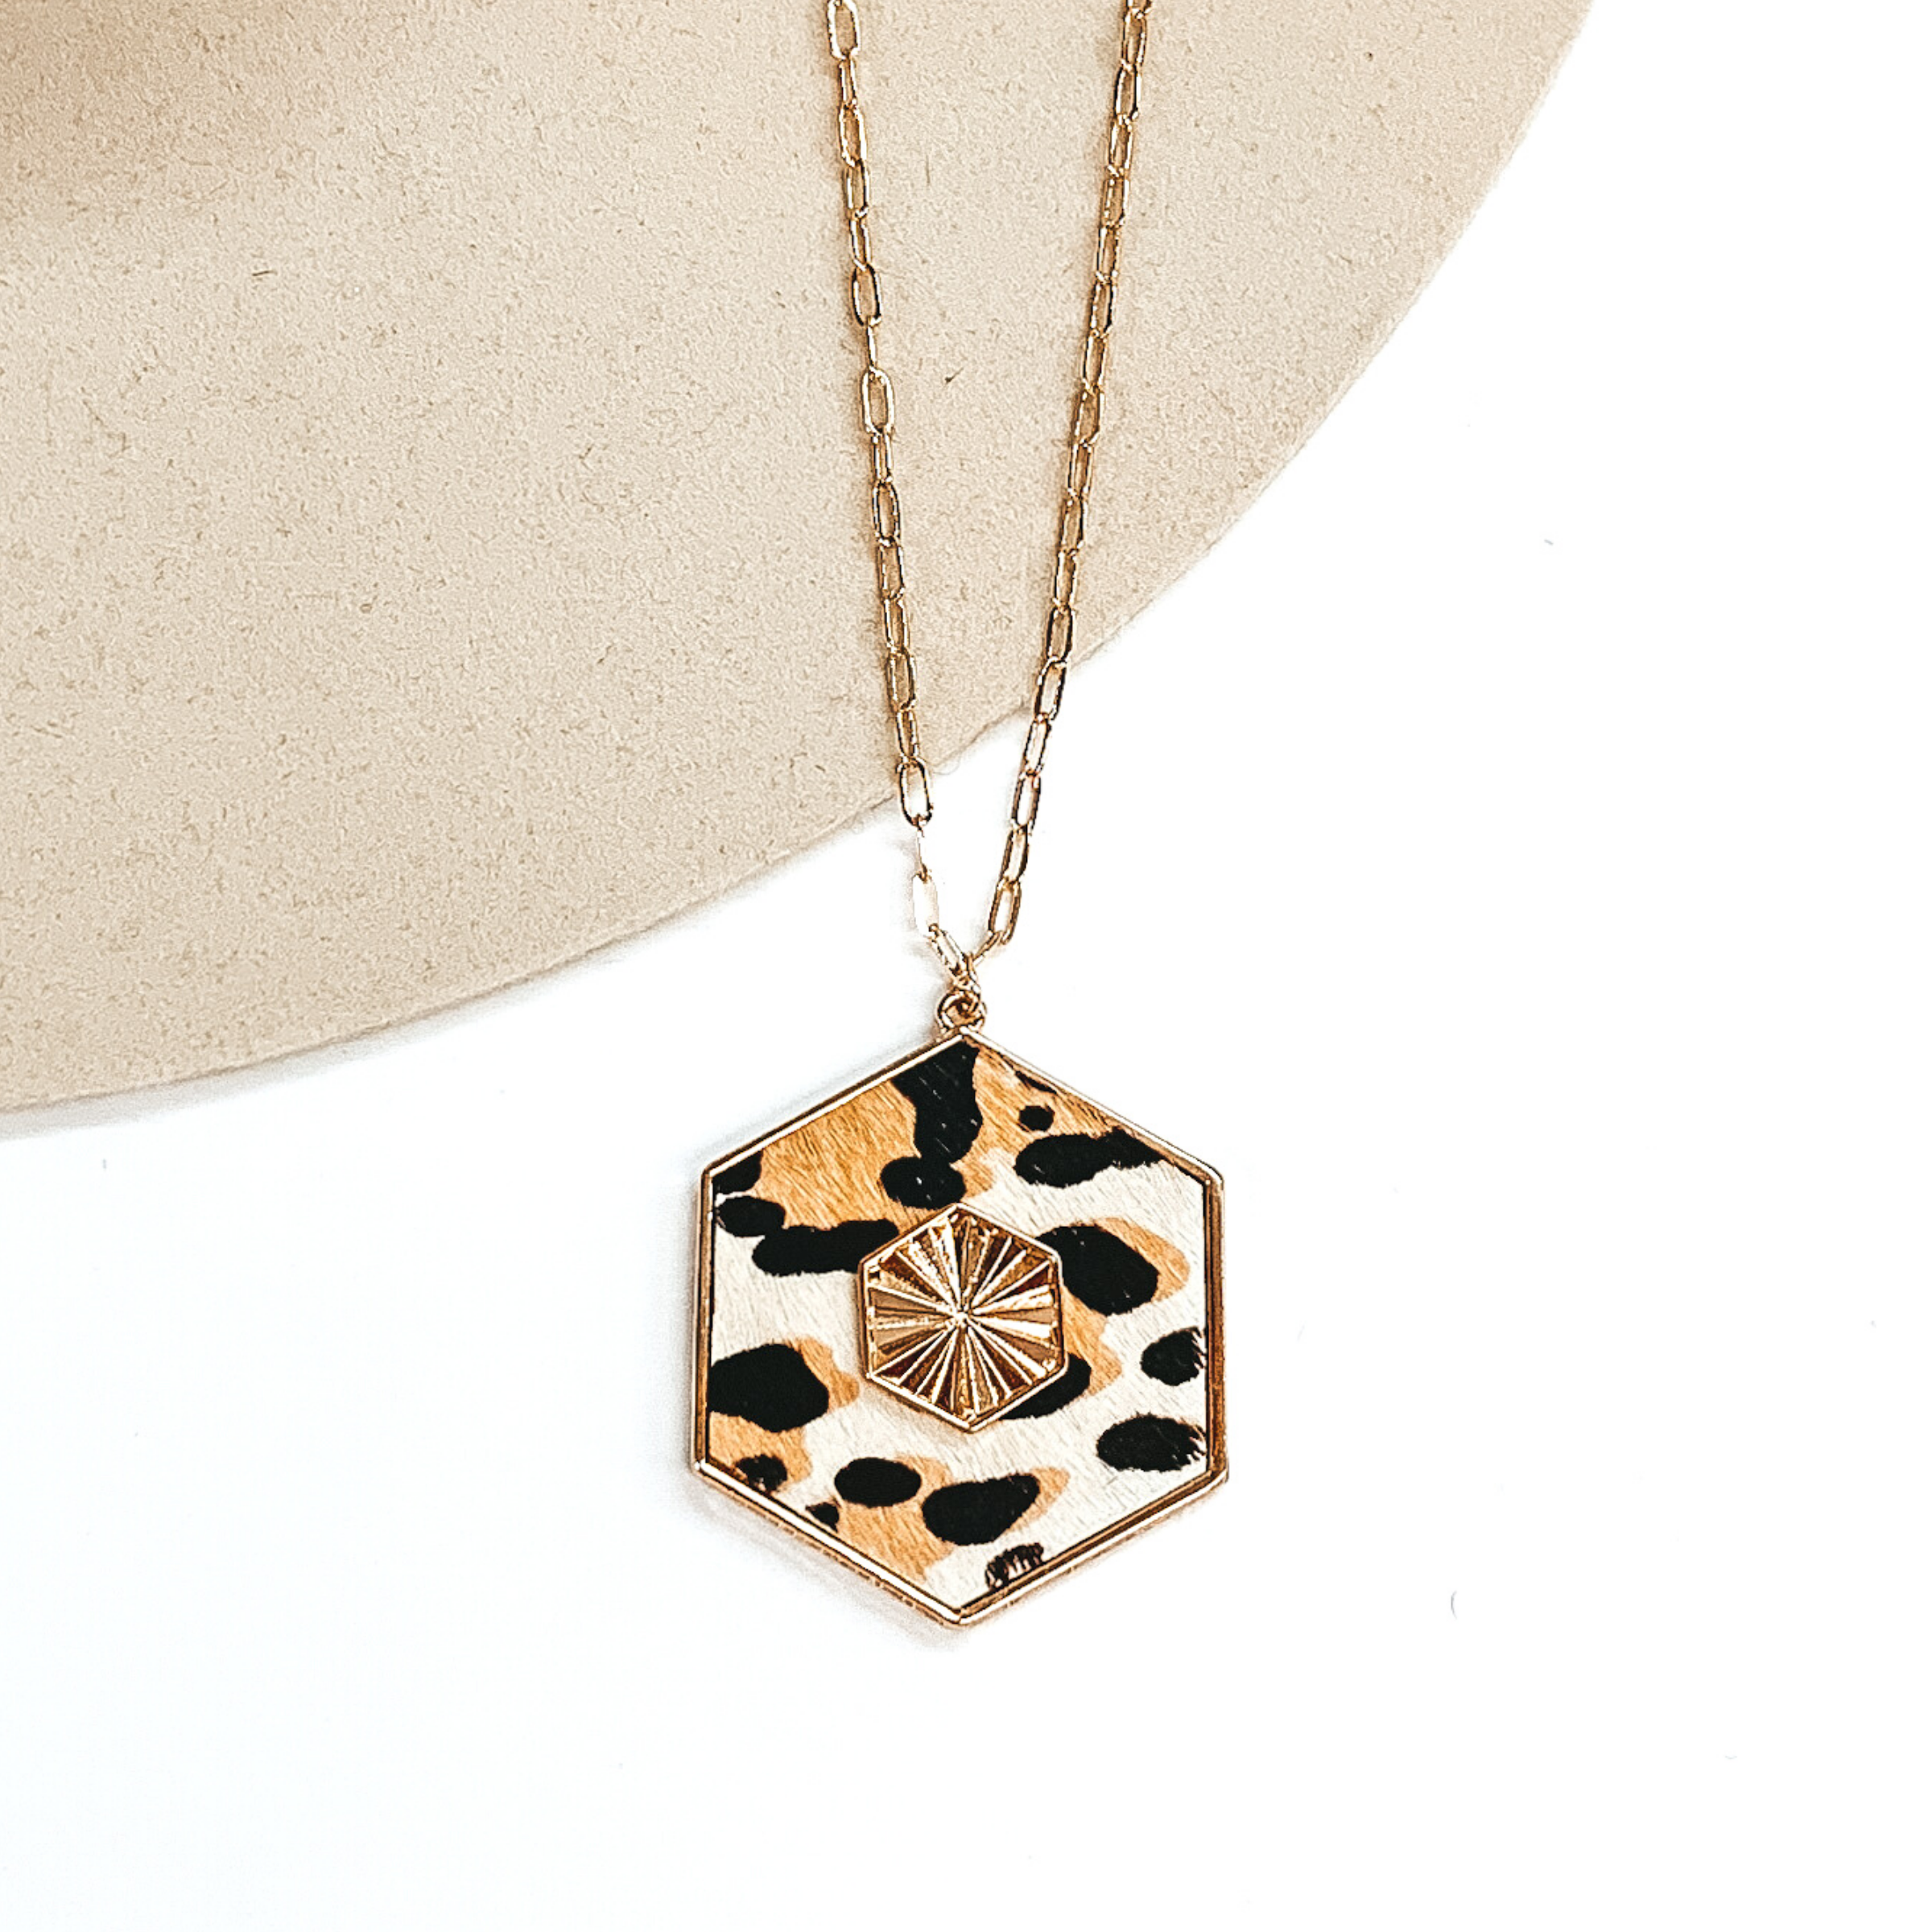 Thin, gold chained necklace with an ivory hexagon pendant with a black and tan leopard print. The pendant is outlined in gold and has a gold, textured hexagon charm in the center. This necklace is pictured on a white and beige background. 